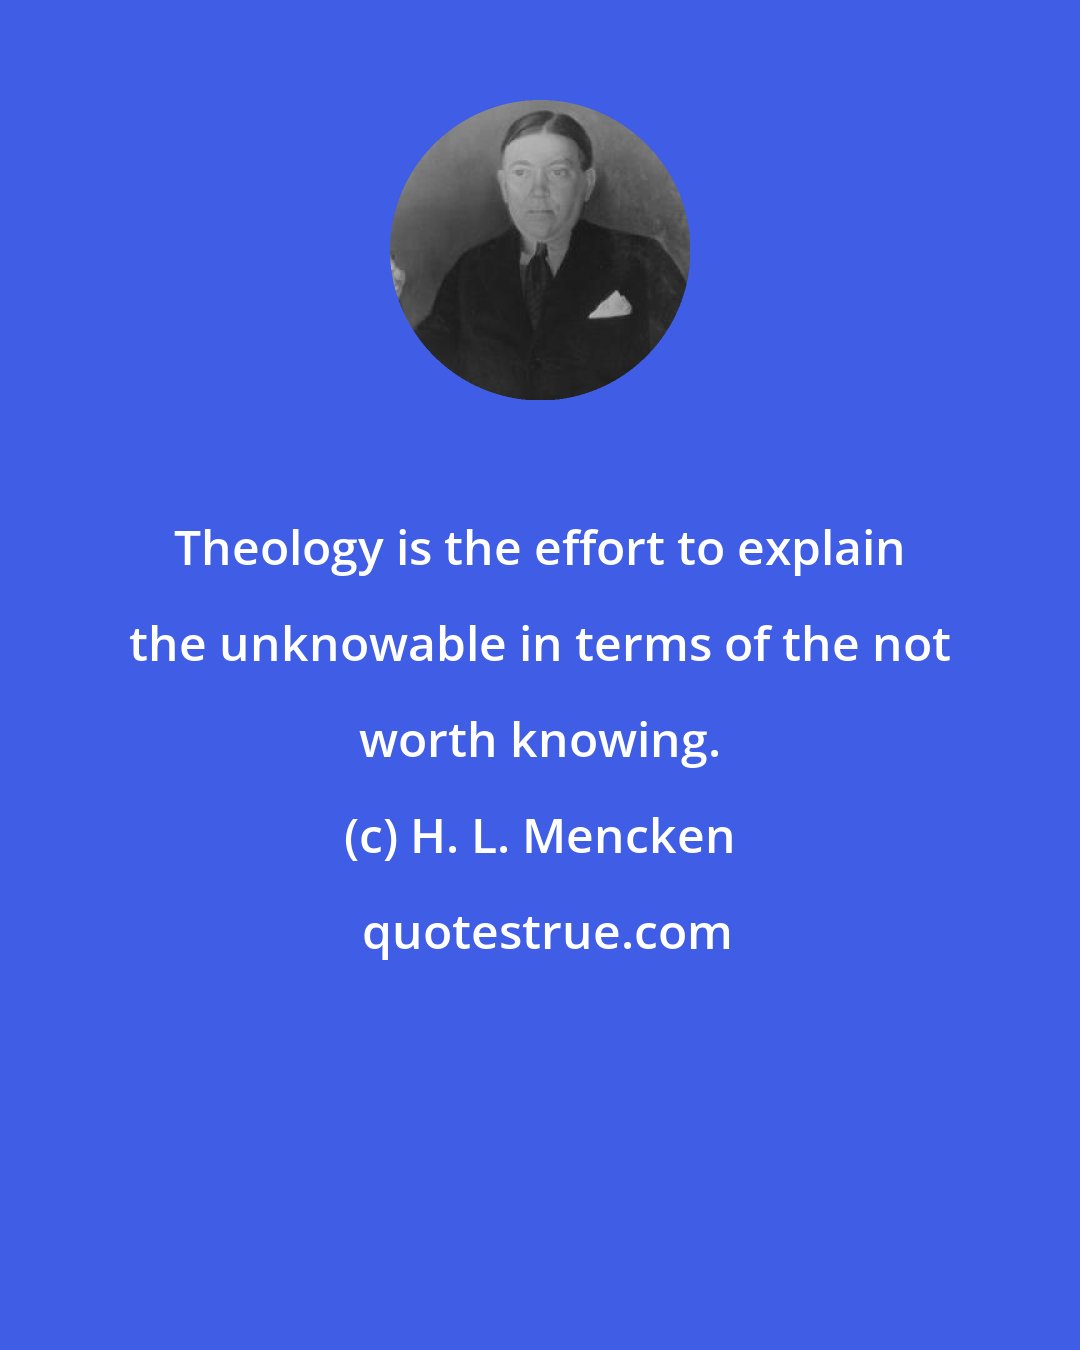 H. L. Mencken: Theology is the effort to explain the unknowable in terms of the not worth knowing.